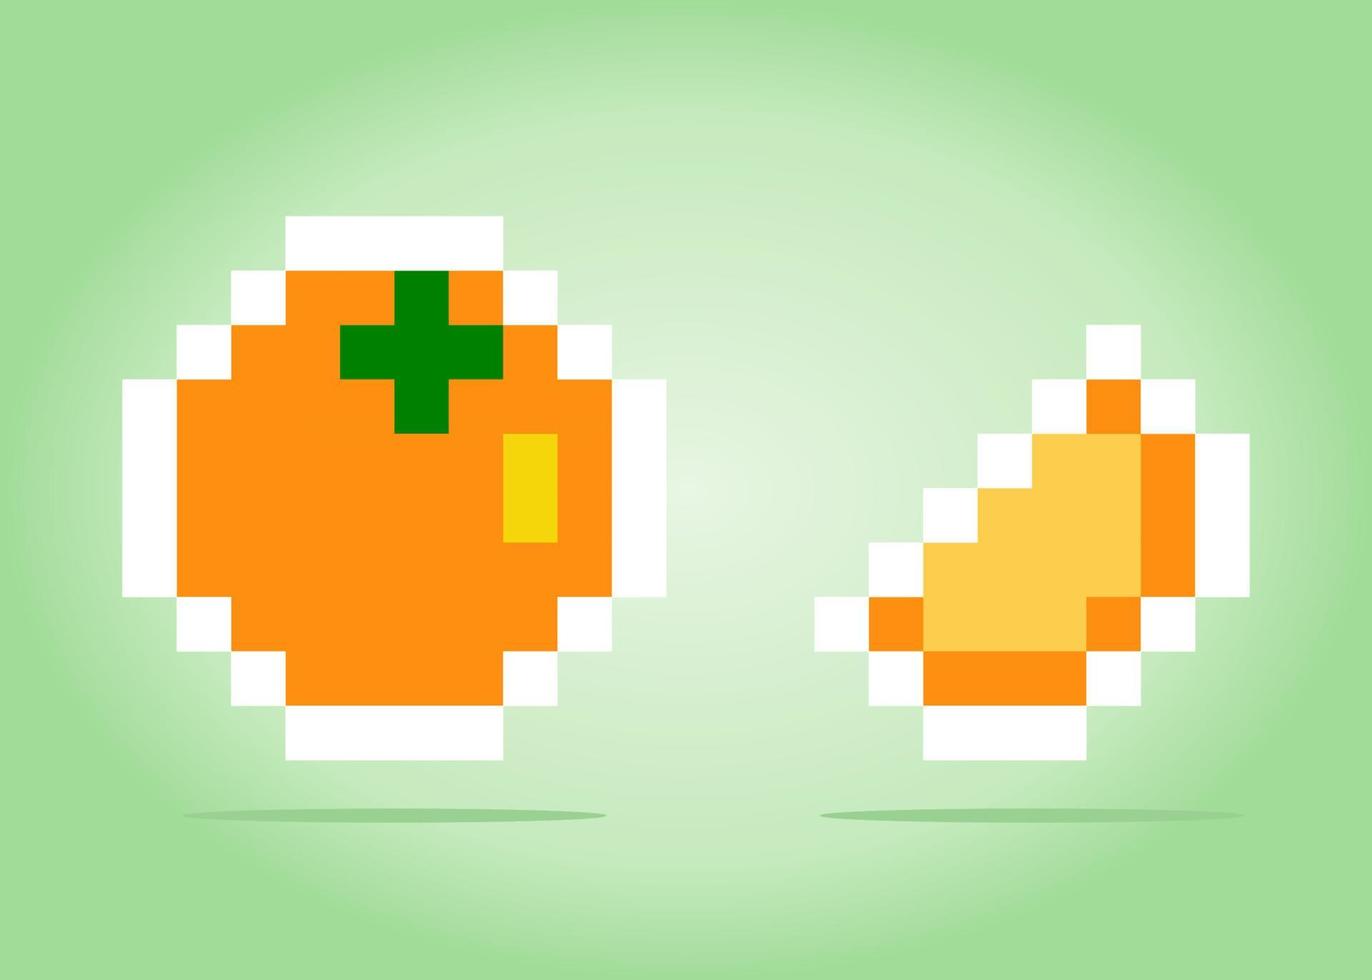 8 bit pixel of orange. Citrus Fruits for game assets and cross stitch patterns in vector illustrations.